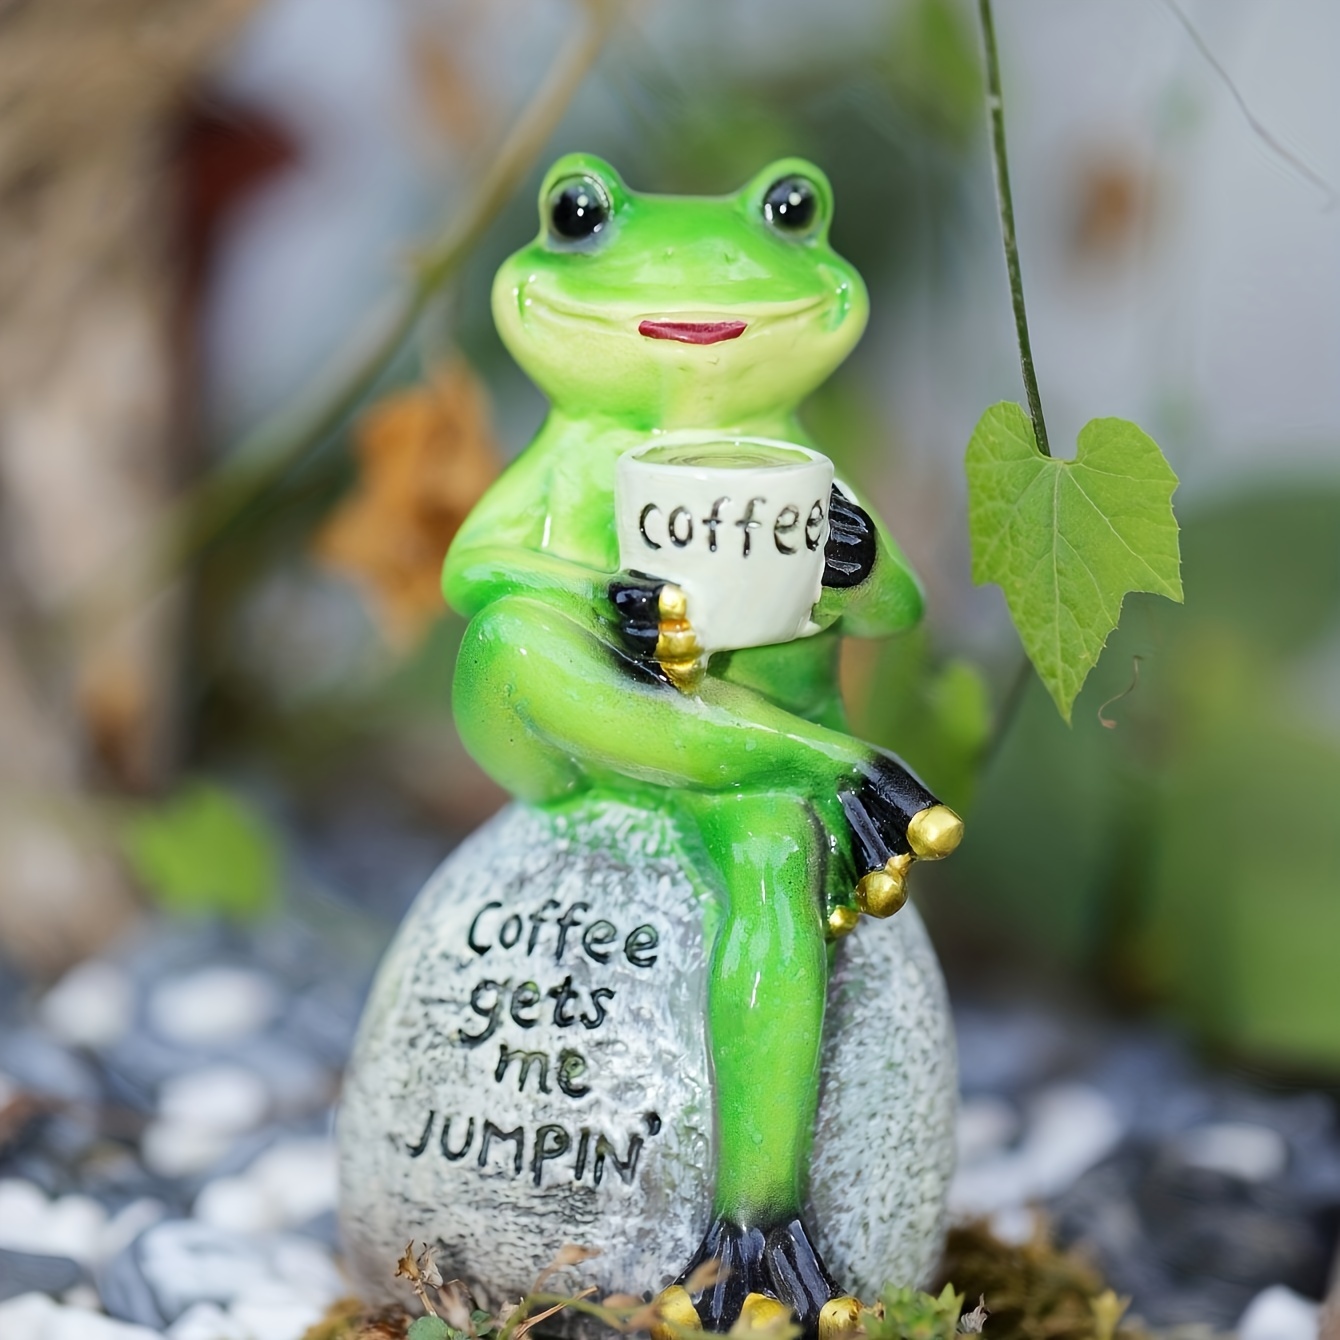 

Charming Coffee-loving Frog Figurine - Resin Crafted Desk Decor